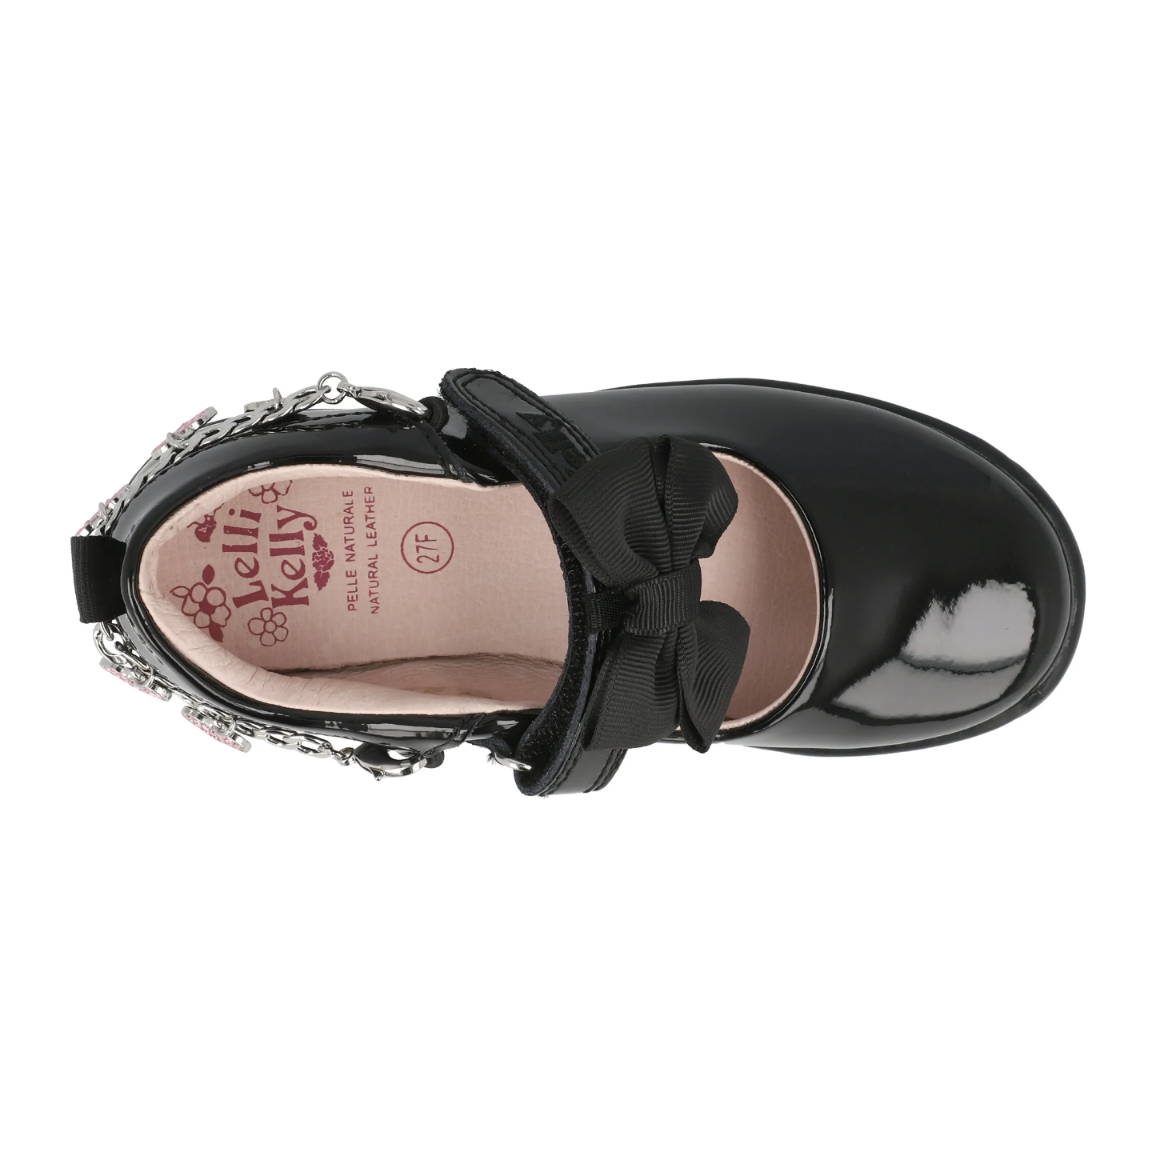 A girls Mary Jane school shoe by Lelli Kelly, style LK8224 Angel, in black patent leather with velcro fastening and detachable fabric bow and bracelet. View frpm above